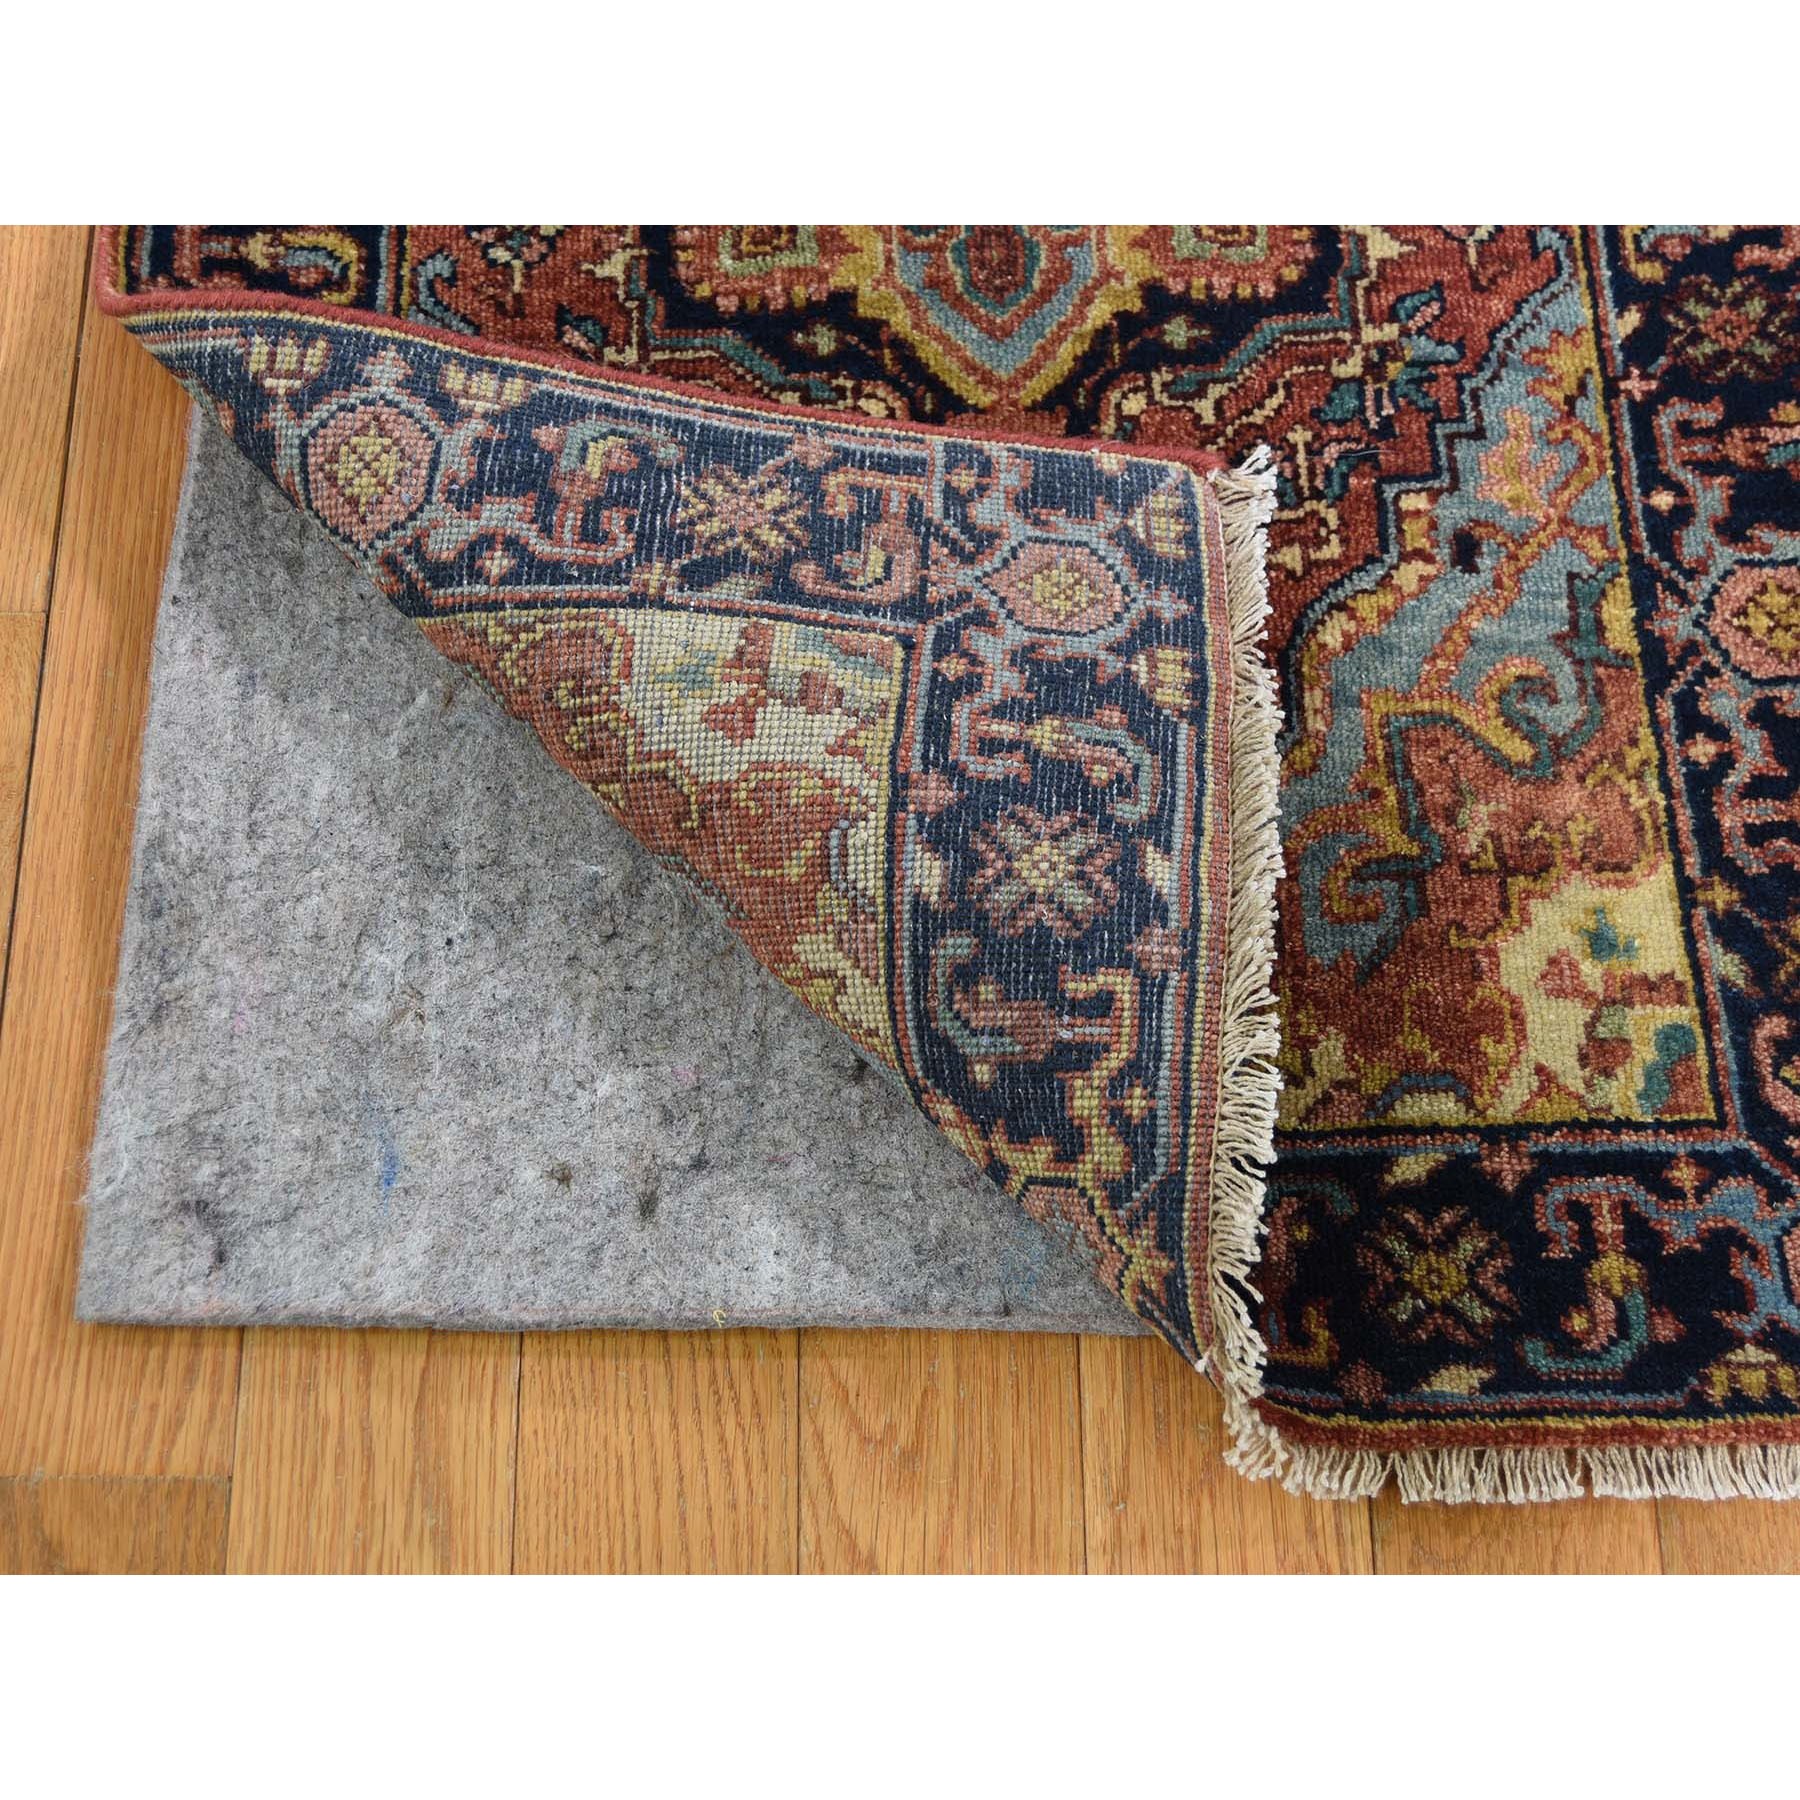 2-x3- Antiqued Heriz Re-creation Pure Wool Hand-Knotted Oriental Rug 